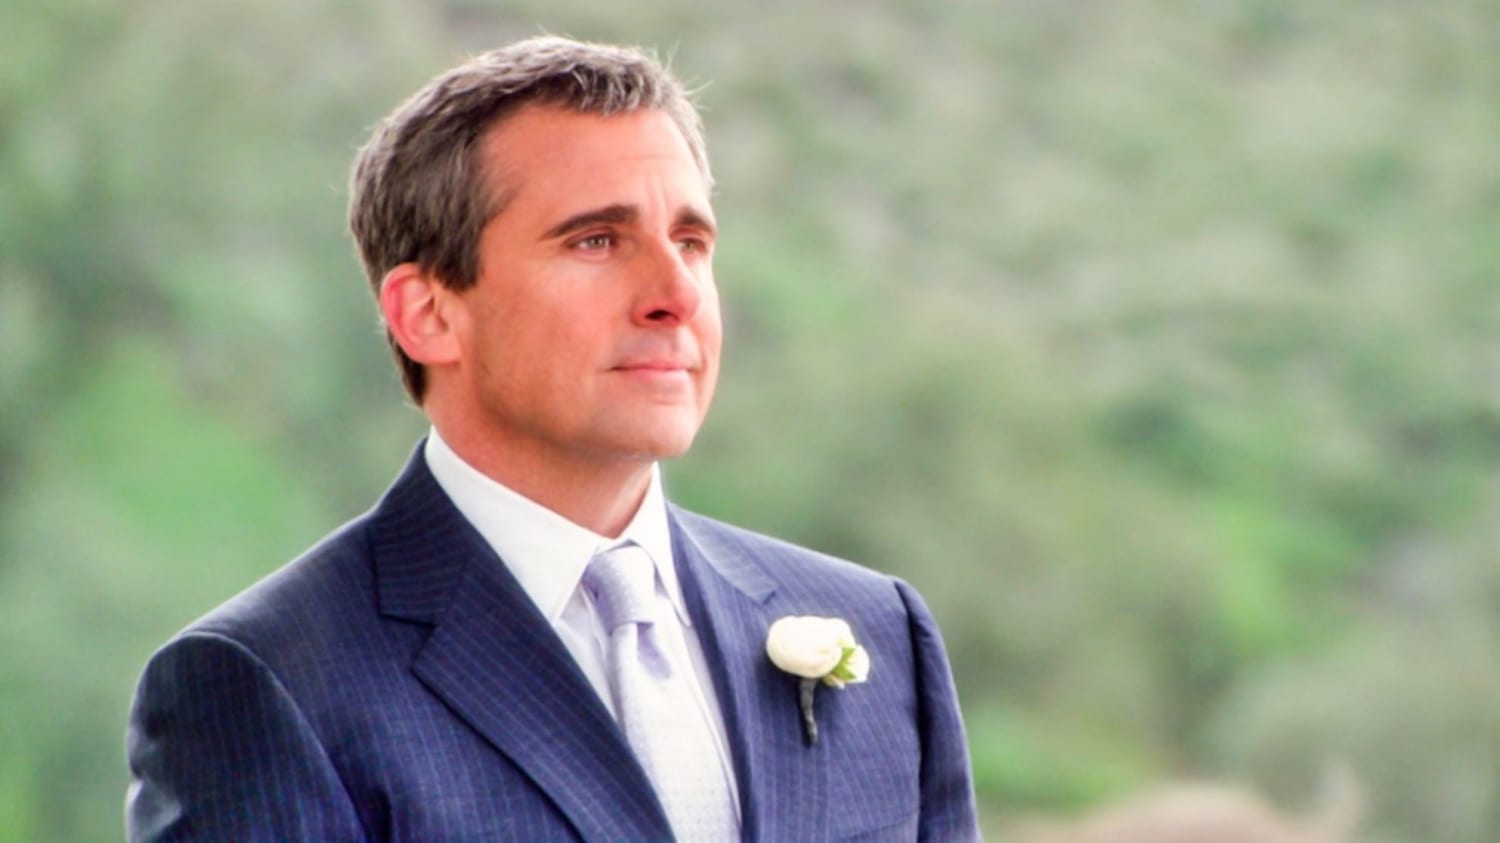 Why The Office Cast and Crew Kept Michael Scott's Return in the Finale a Secret From NBC